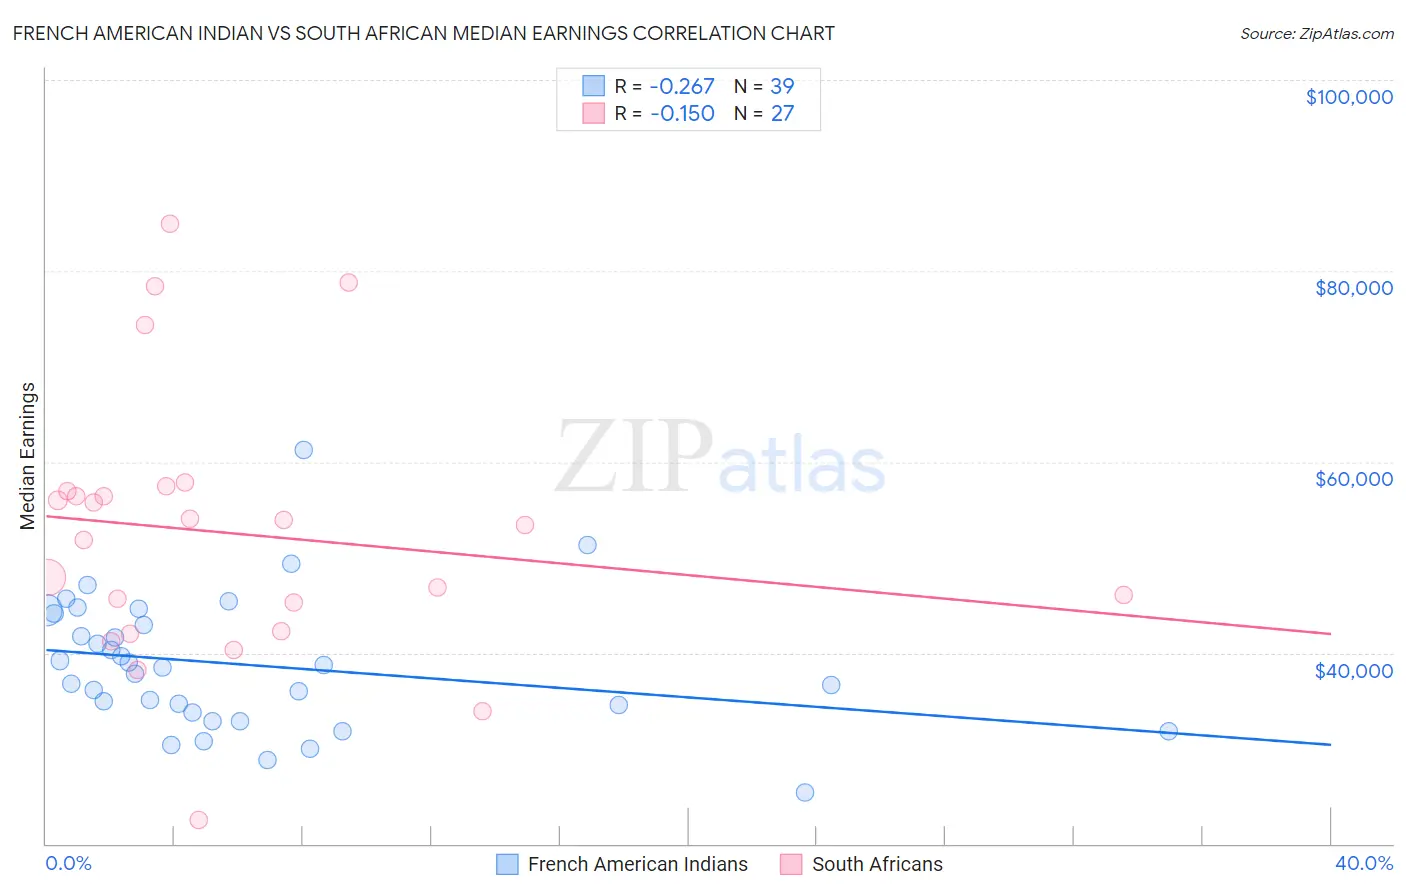 French American Indian vs South African Median Earnings